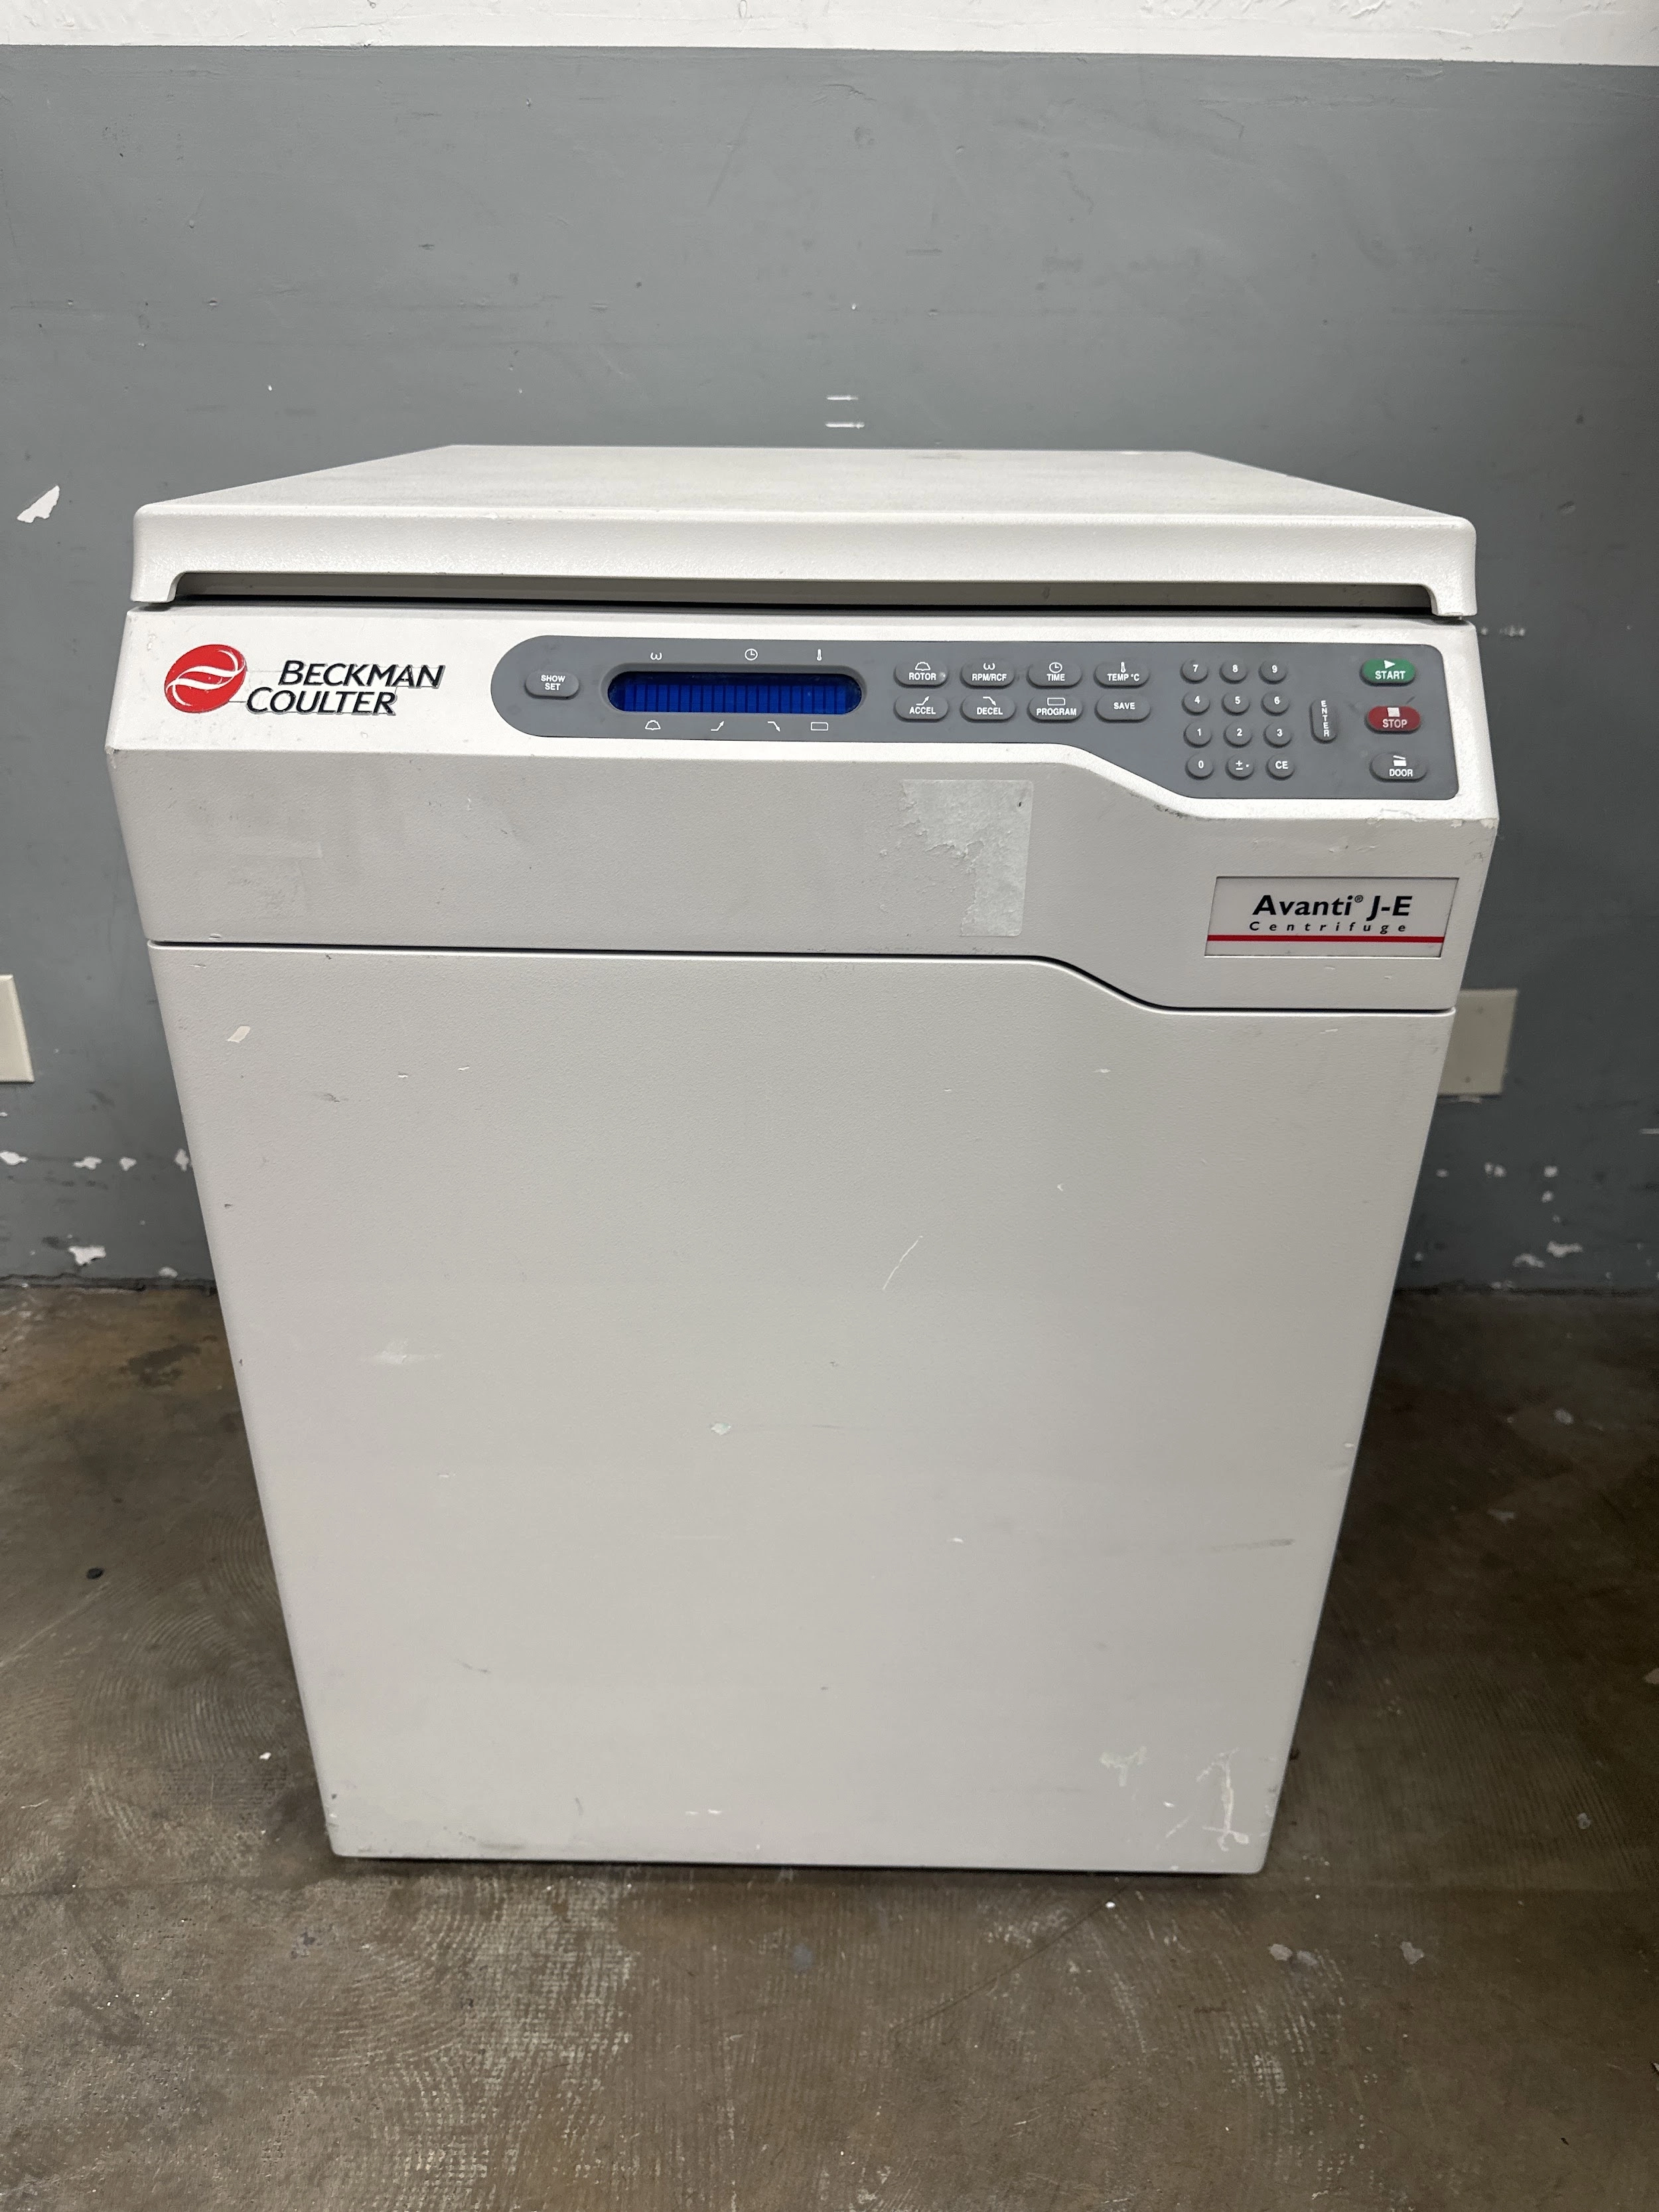 Beckman Coulter Avanti J-E Refrigerated Centrifuge - Rotor is JA-10